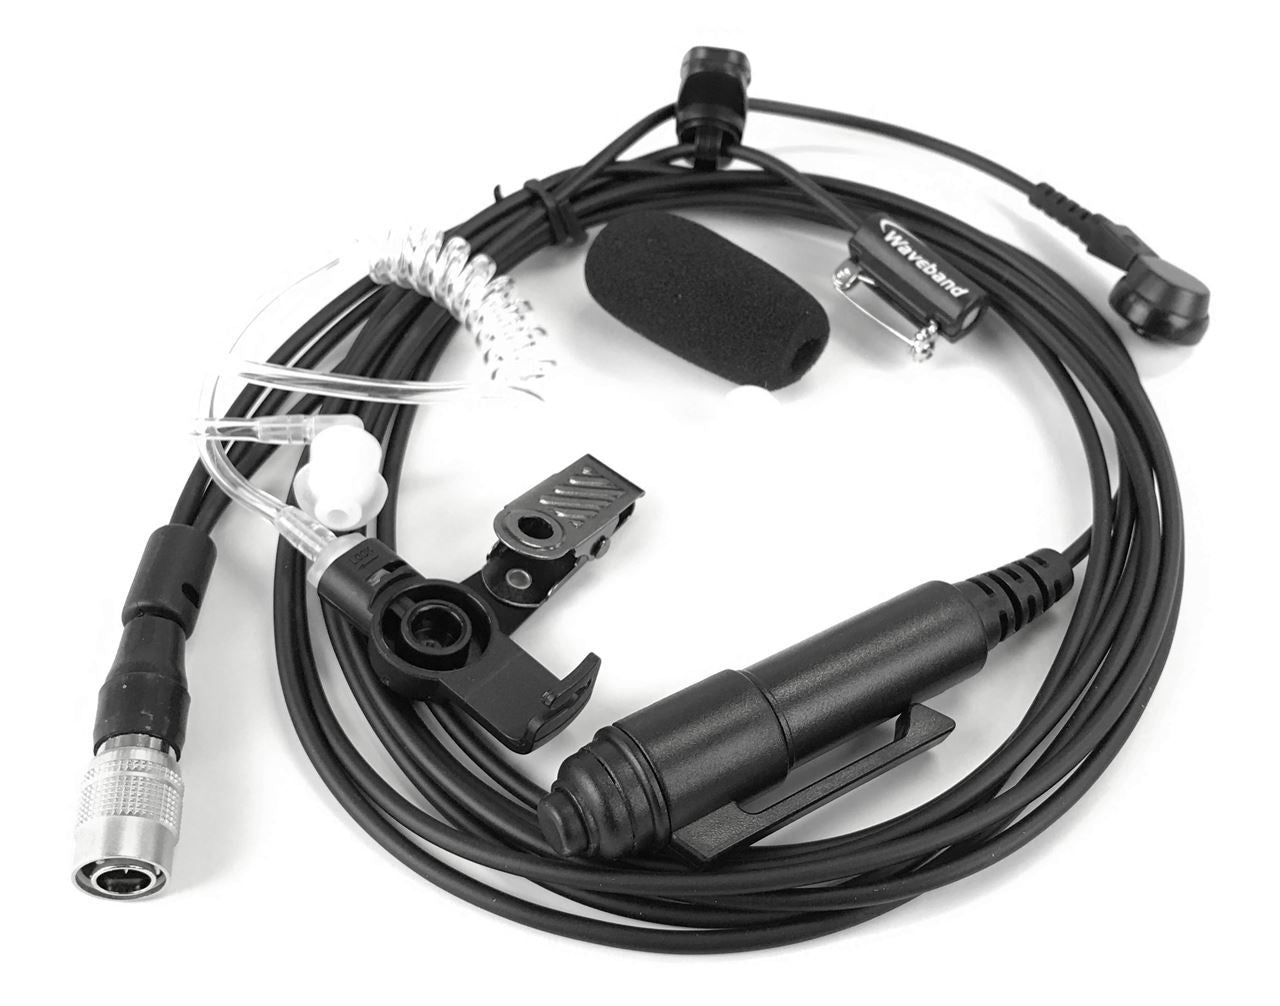 Comparable KHS-12 3 wire mini lapel mic with earphone for use with the Kenwood NX-5300 Portable Radio - Waveband Communications